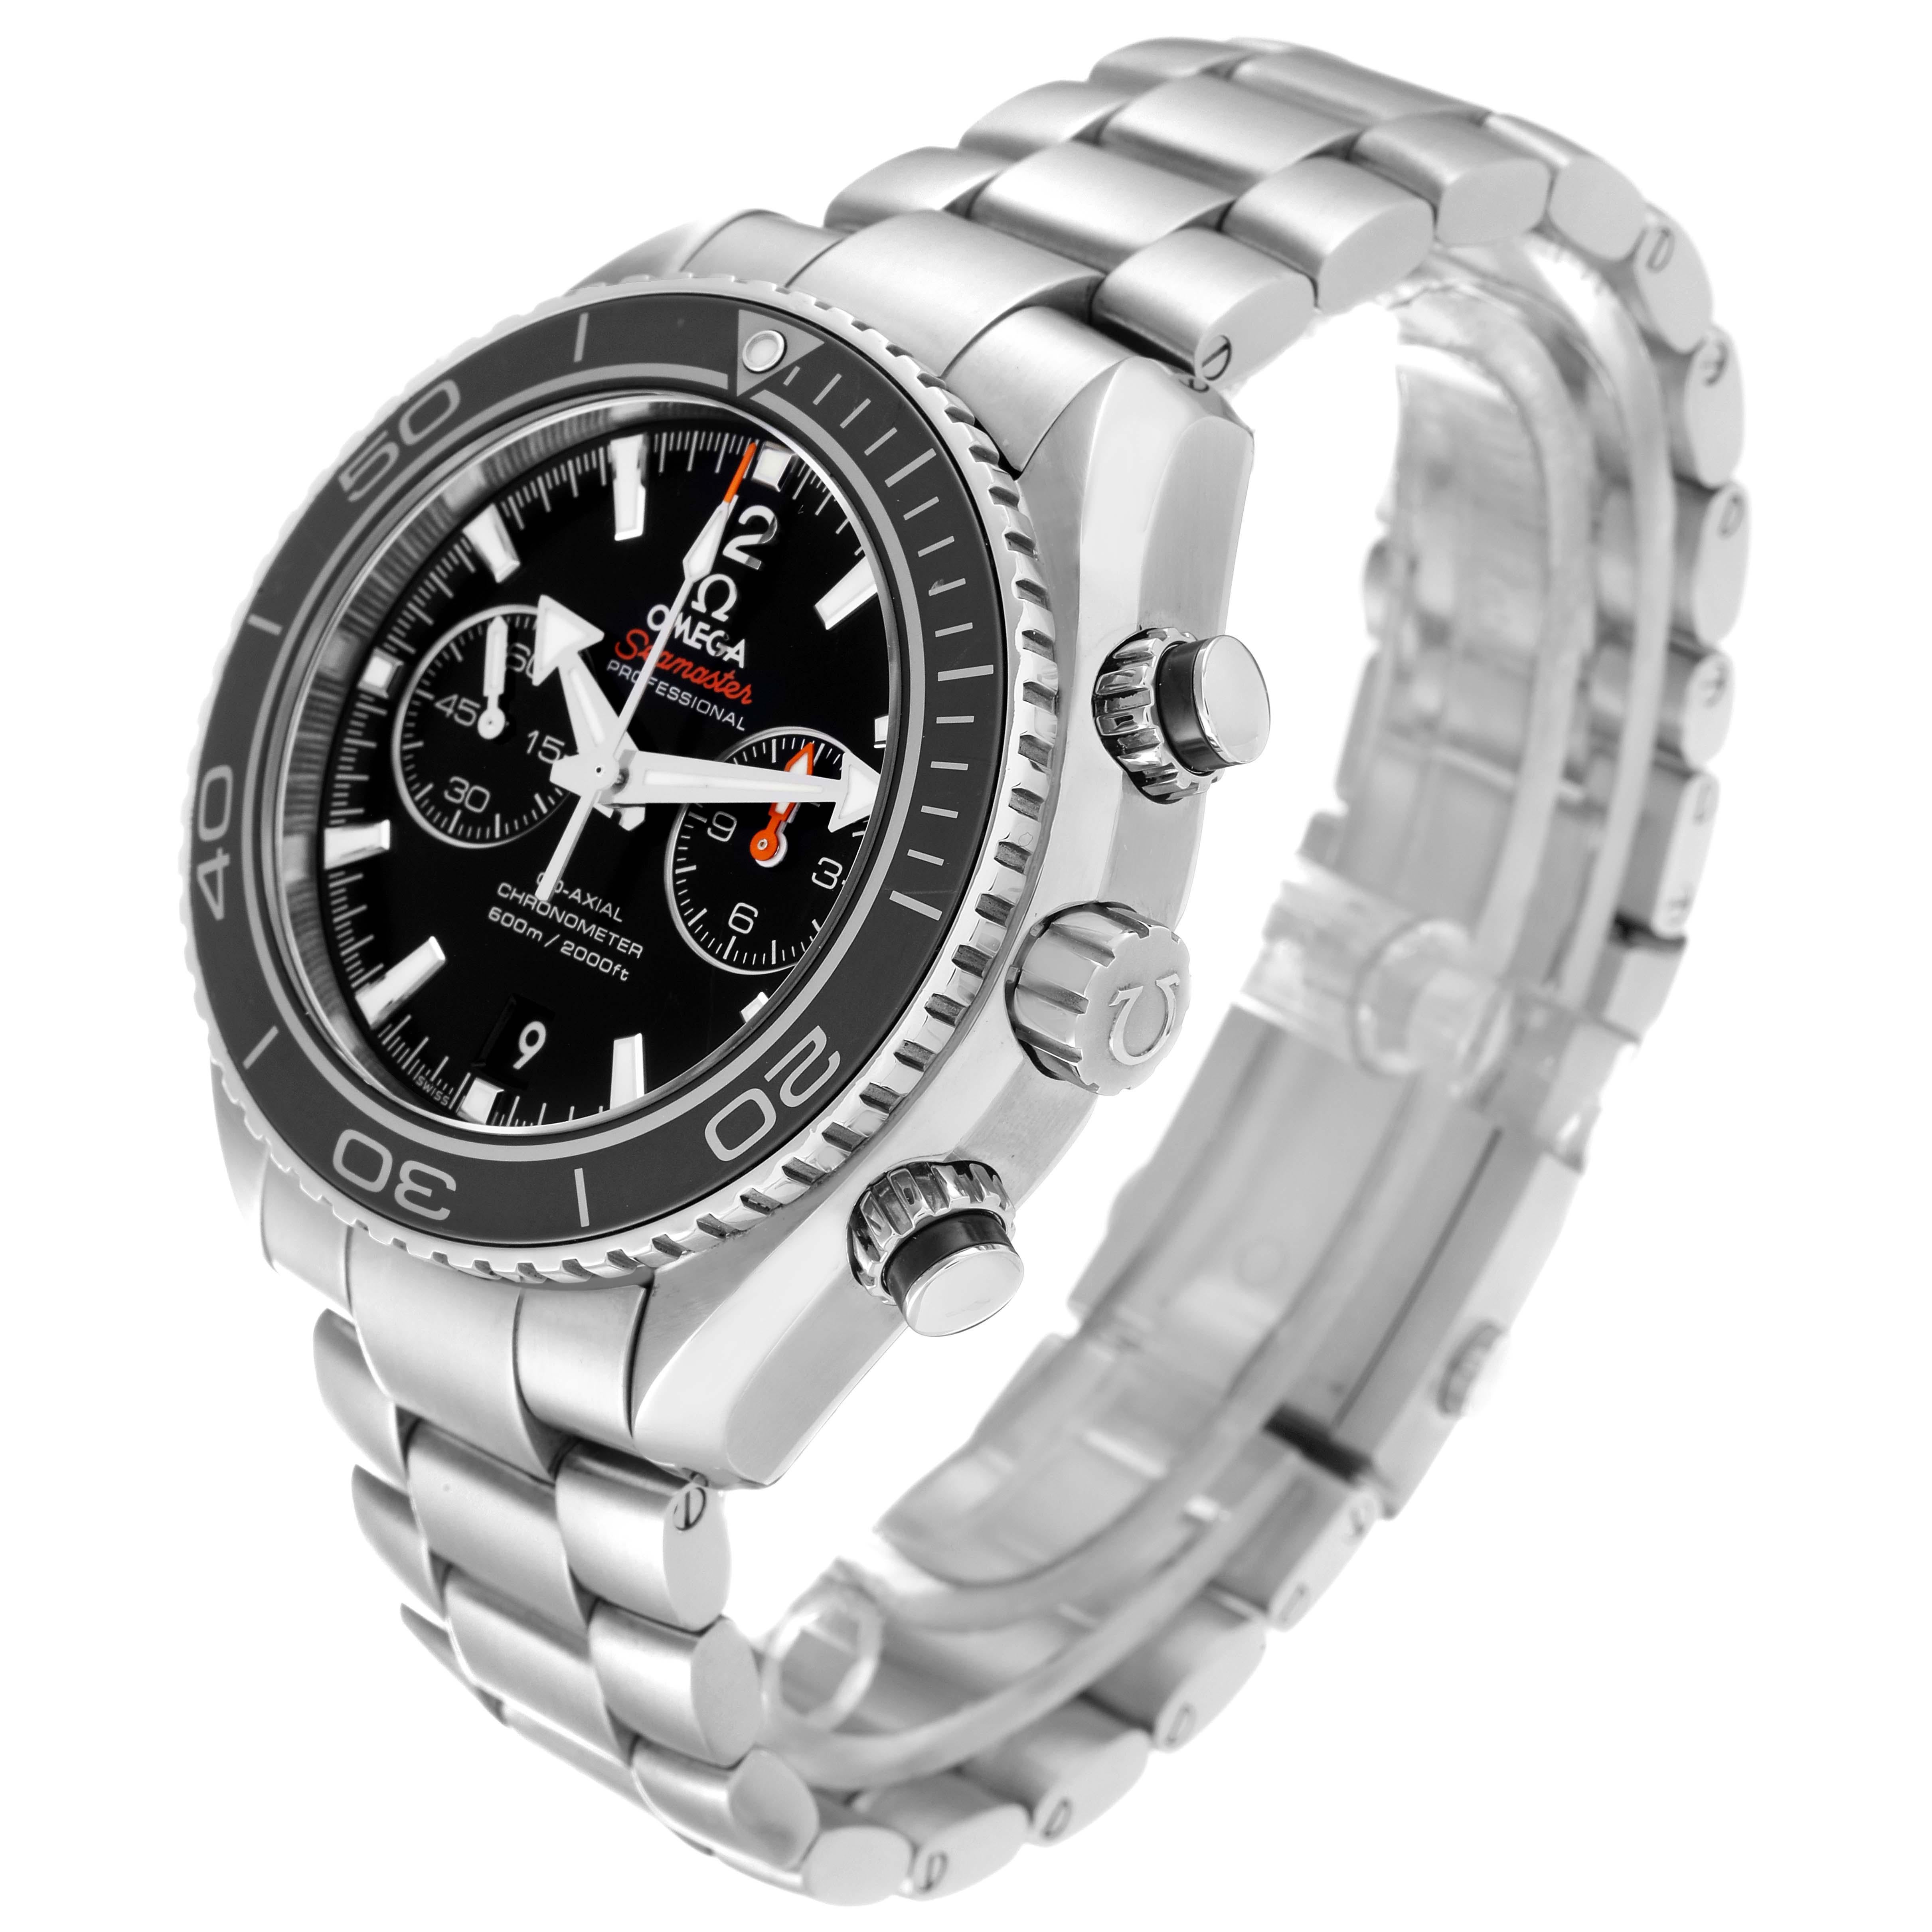 Omega Seamaster Planet Ocean 600M Steel Mens Watch 232.30.46.51.01.001 Box Card For Sale 1